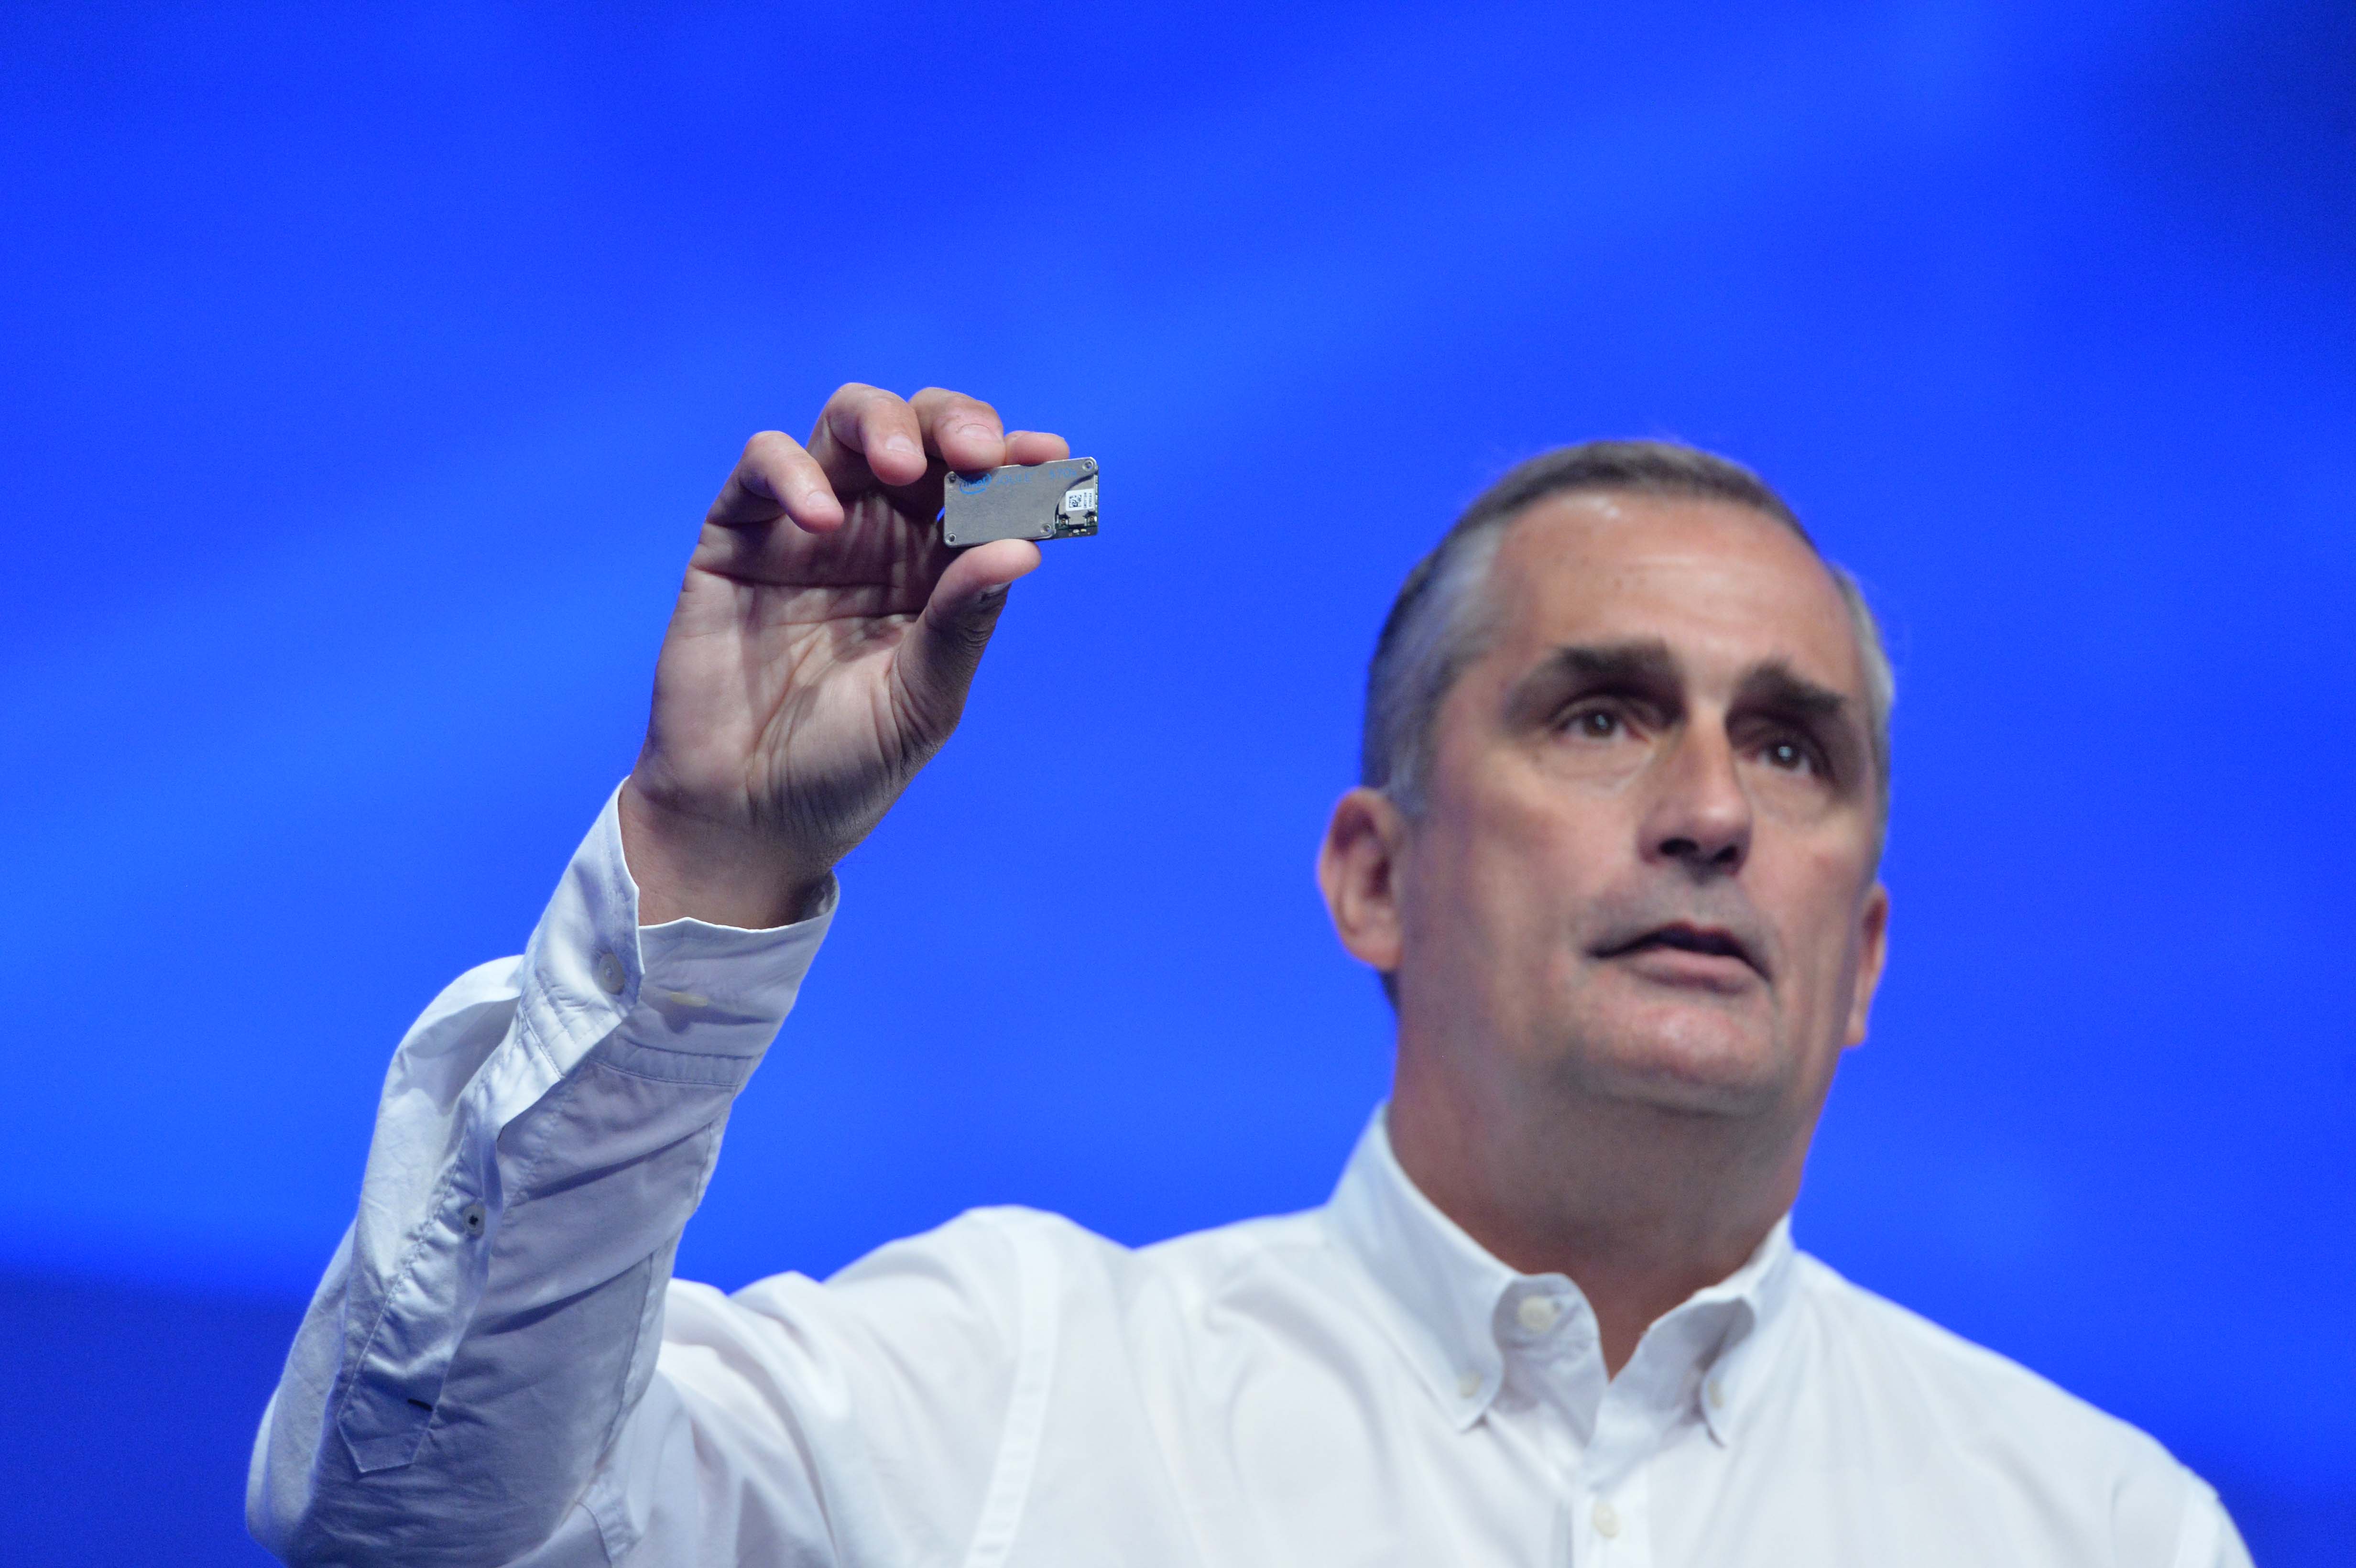 Intel CEO Brian Krzanich displays a Joule maker board at the 2016 Intel Developer Forum in San Francisco on Tuesday, Aug. 16, 2016, during his opening keynote presentation. His presentation offered perspective on the unique role Intel will play as the boundaries of computing continue to expand. (Credit: Intel Corporation)